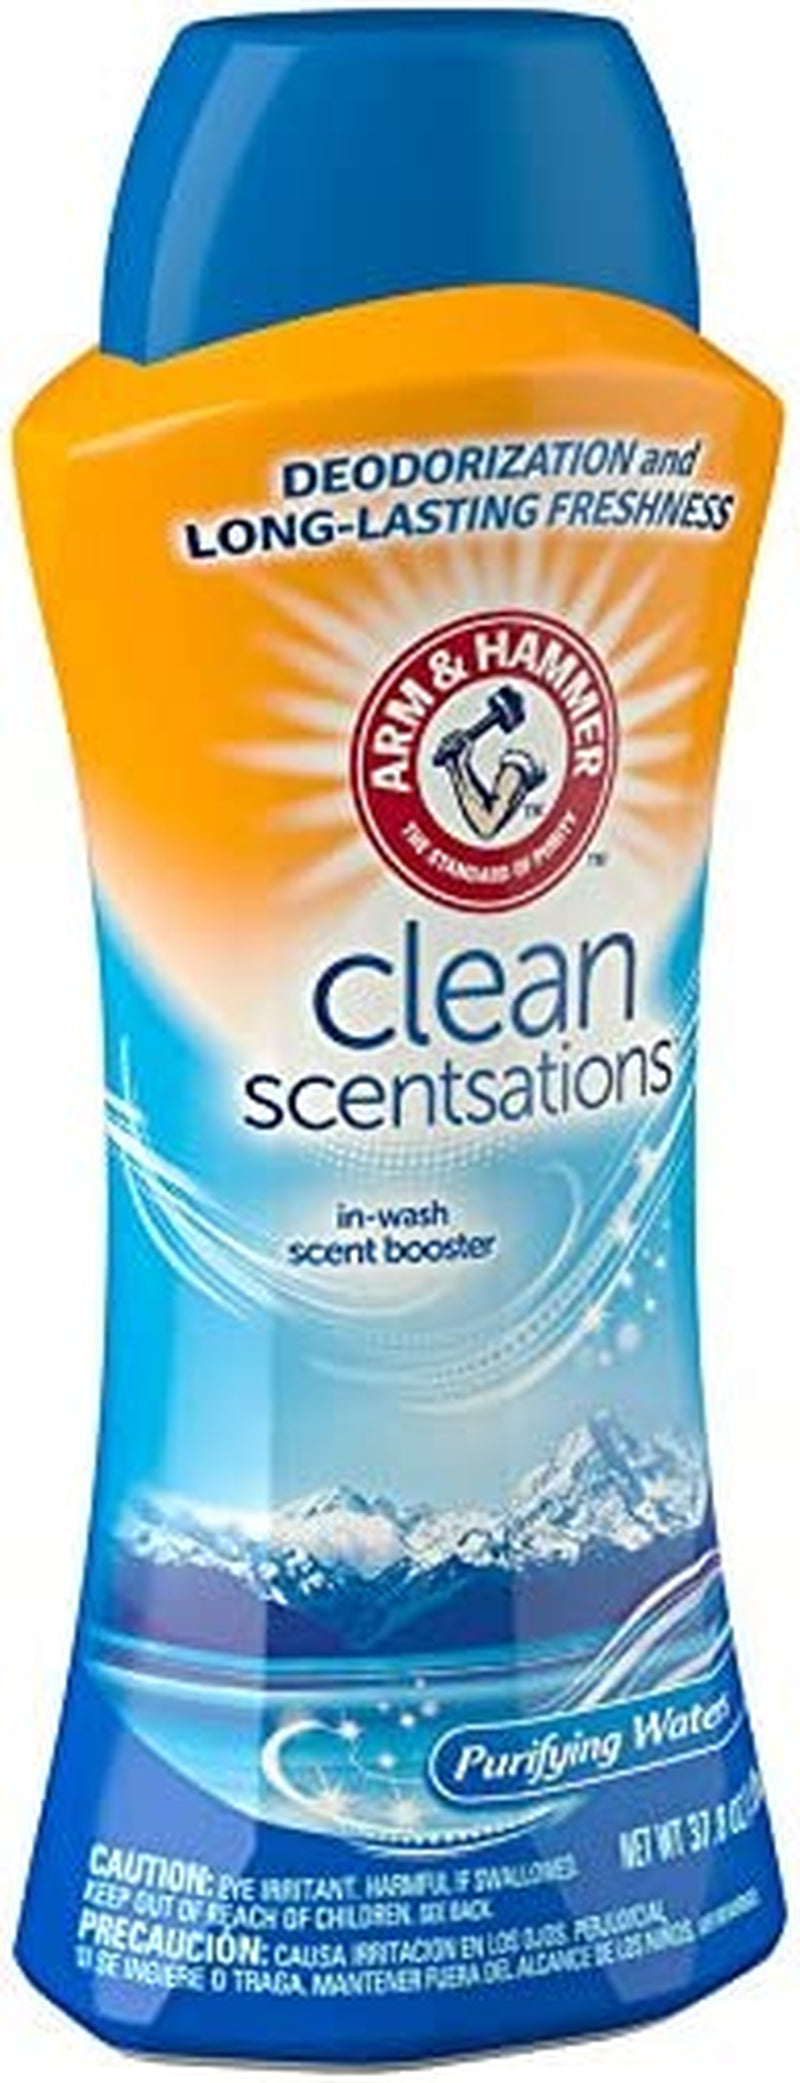 In-Wash Scent Booster, Purifying Waters, 37.8 Oz